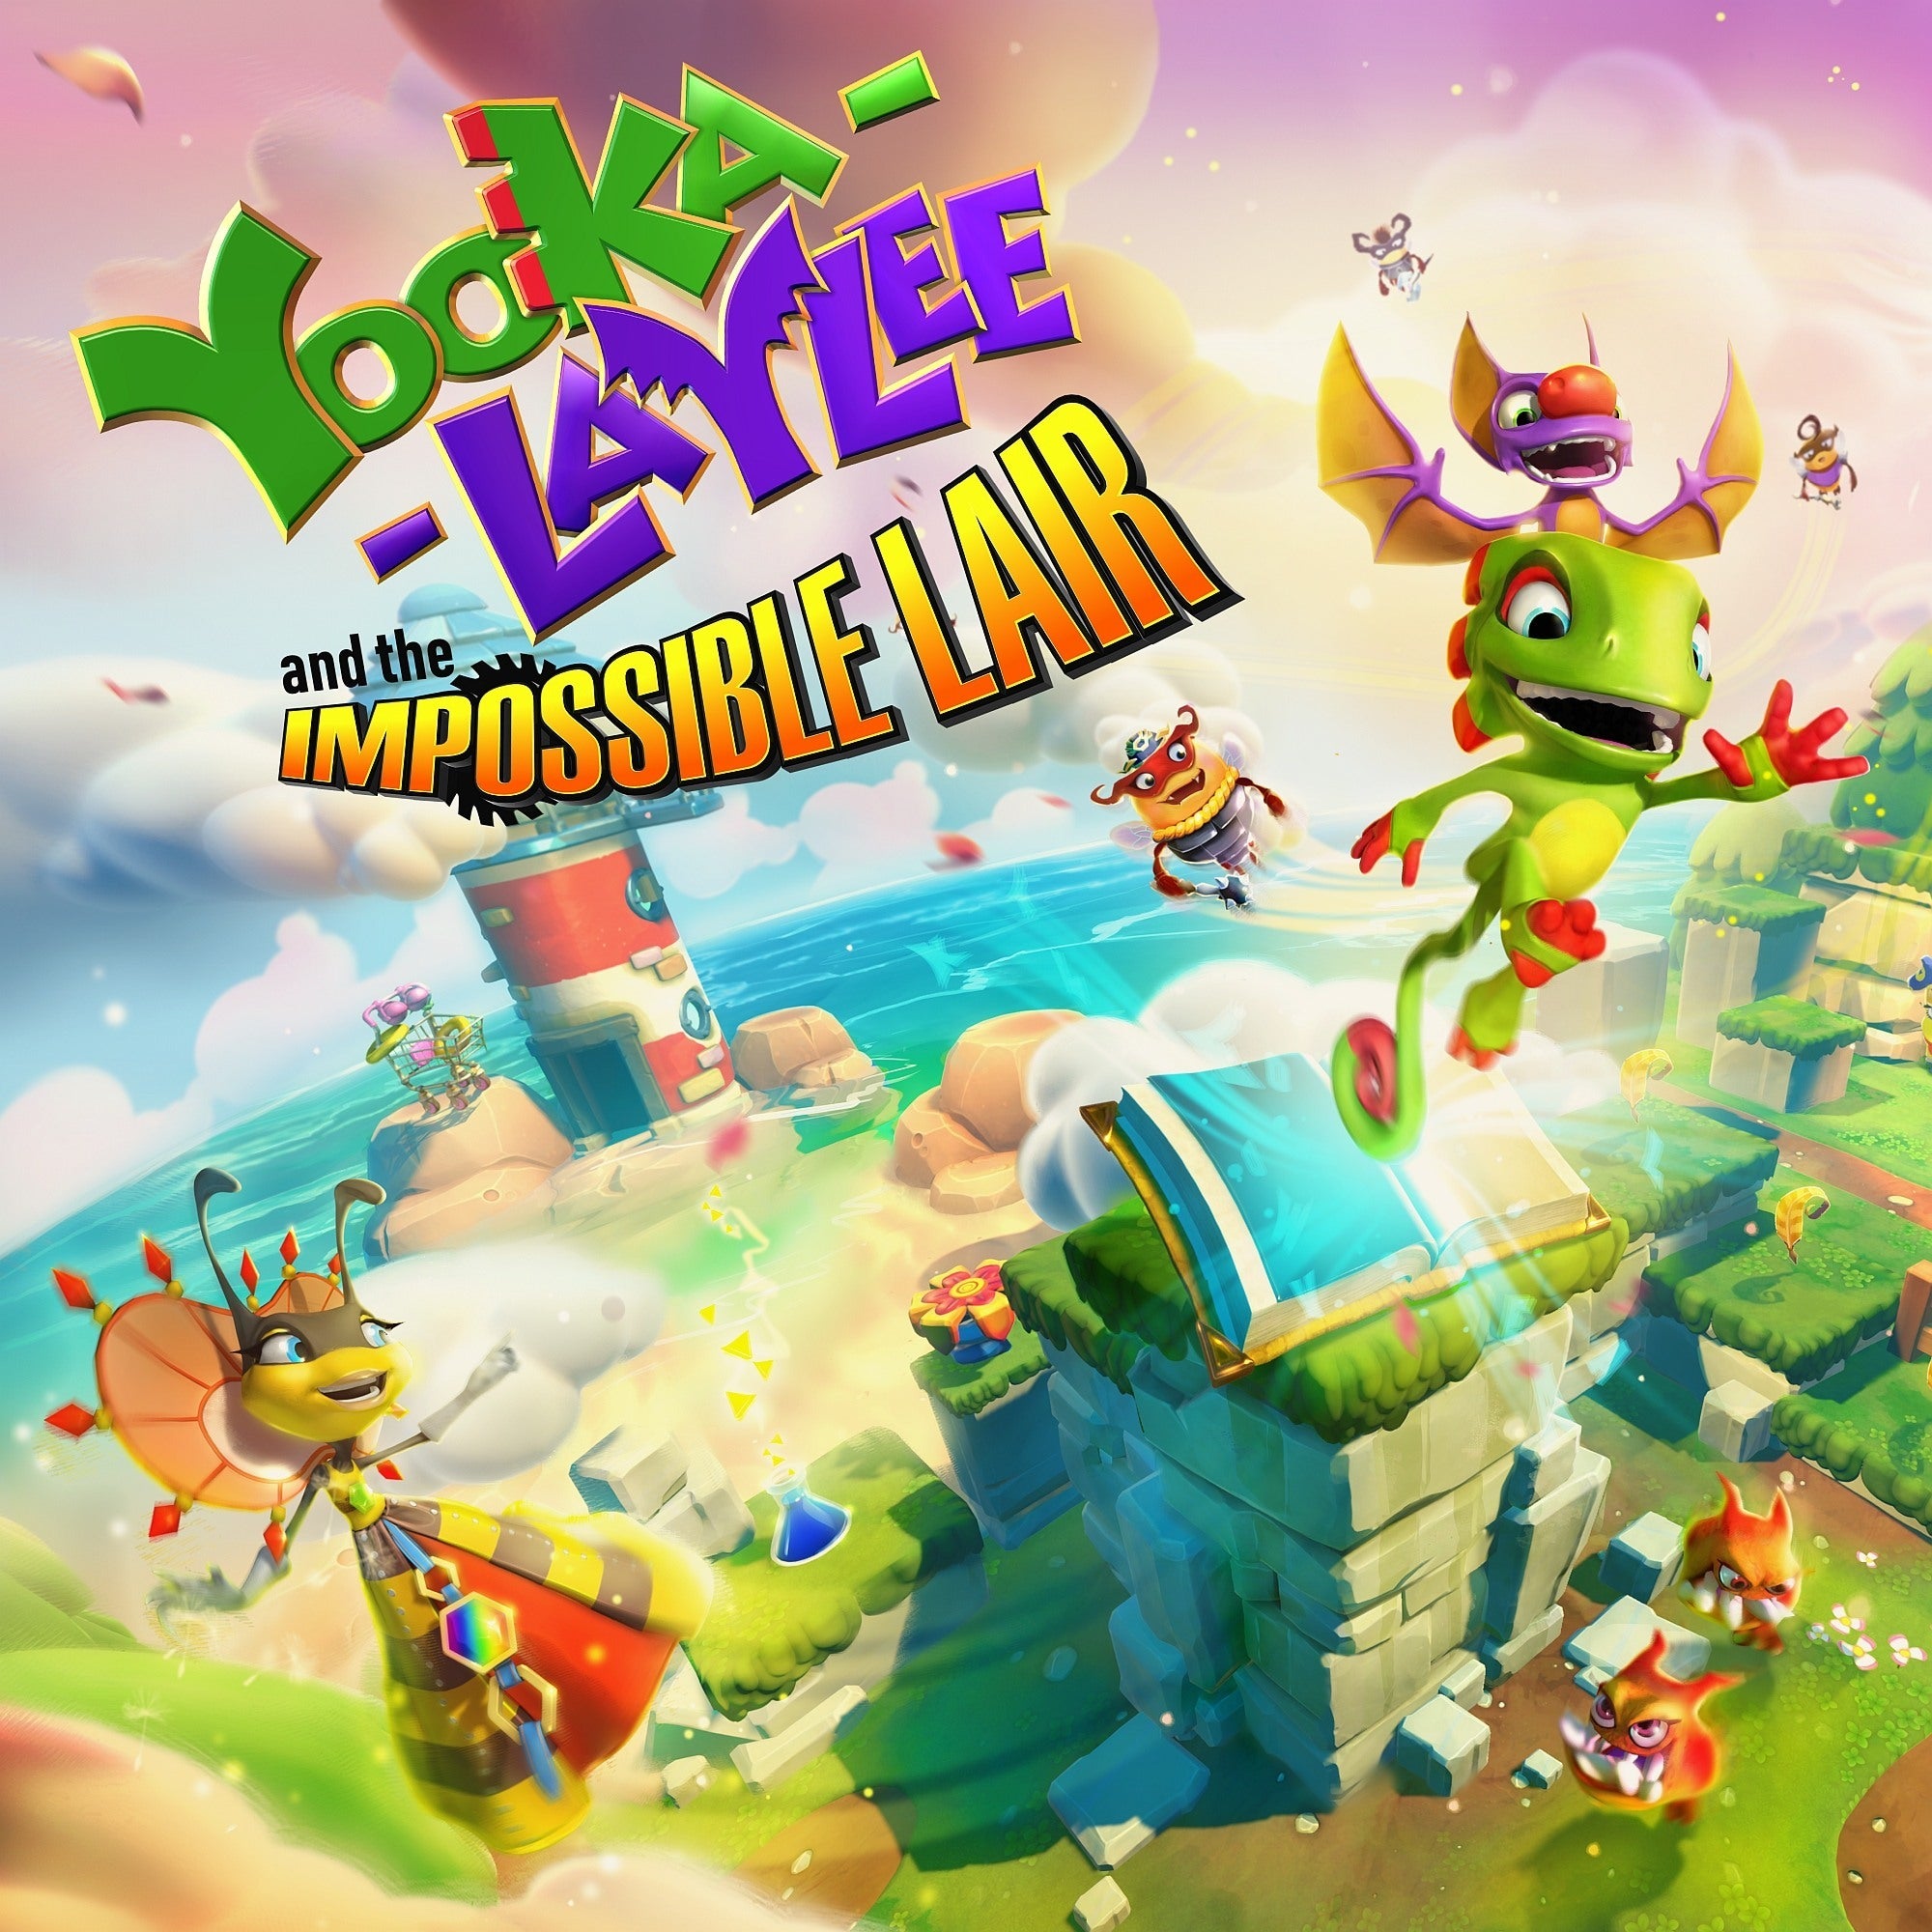 yooka-laylee-and-the-impossible-layer-button-v2-1559939500499.jpg